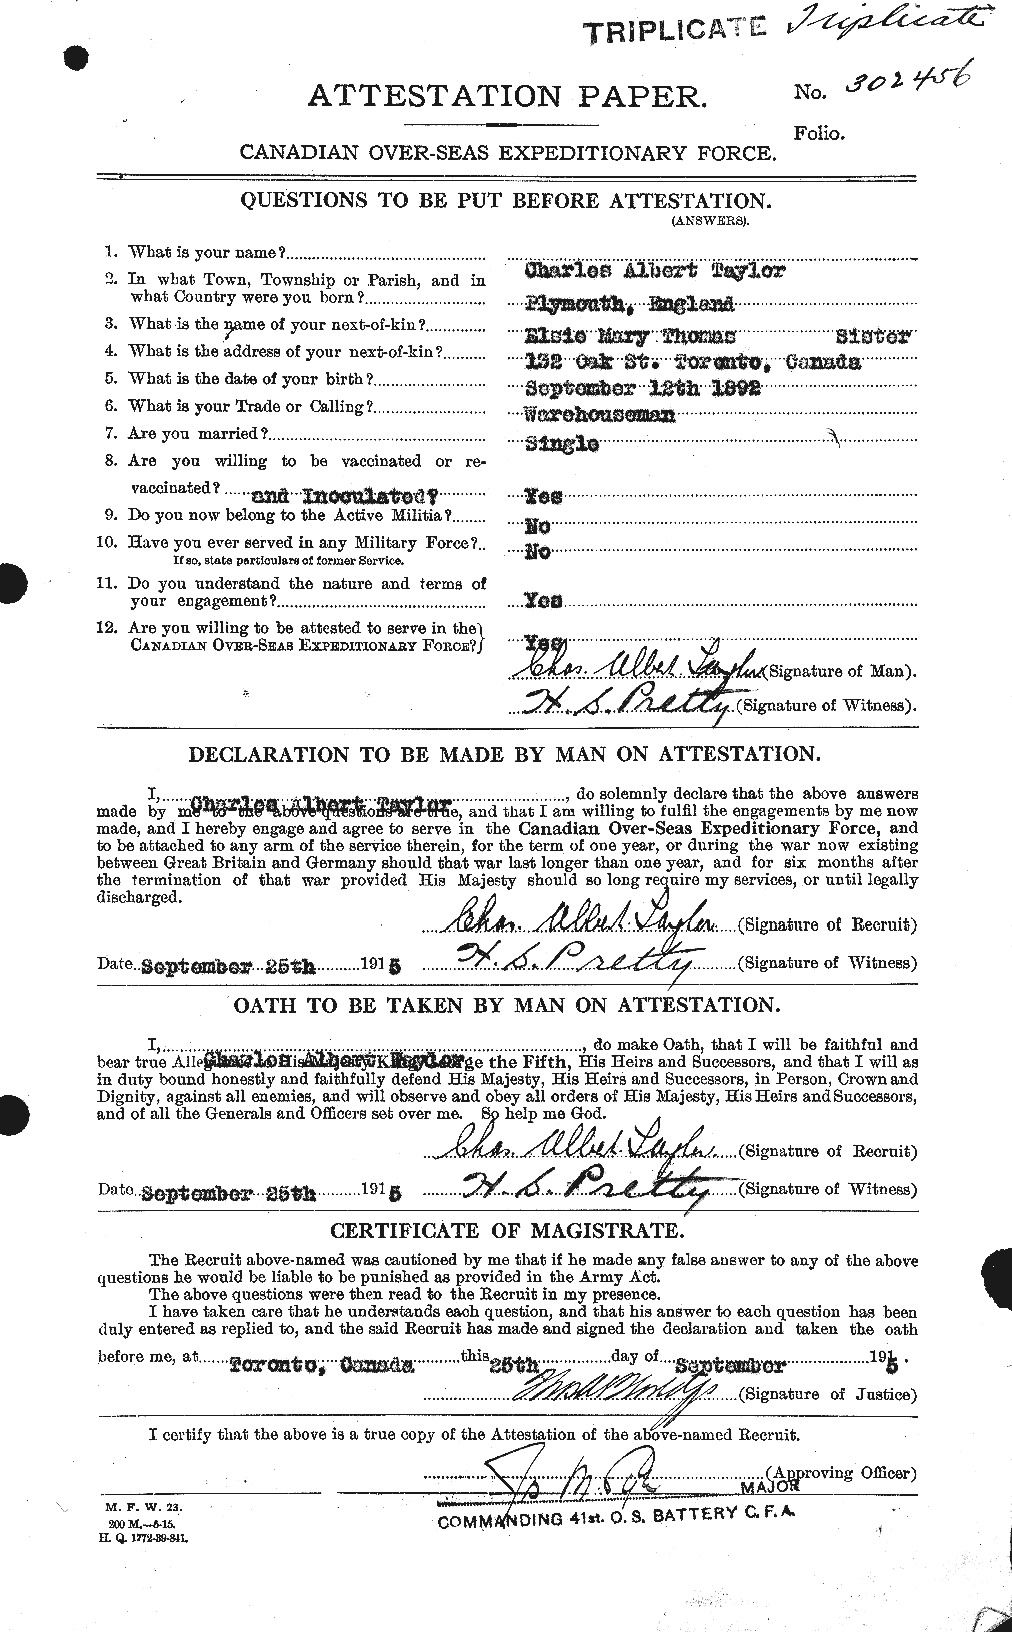 Personnel Records of the First World War - CEF 626828a